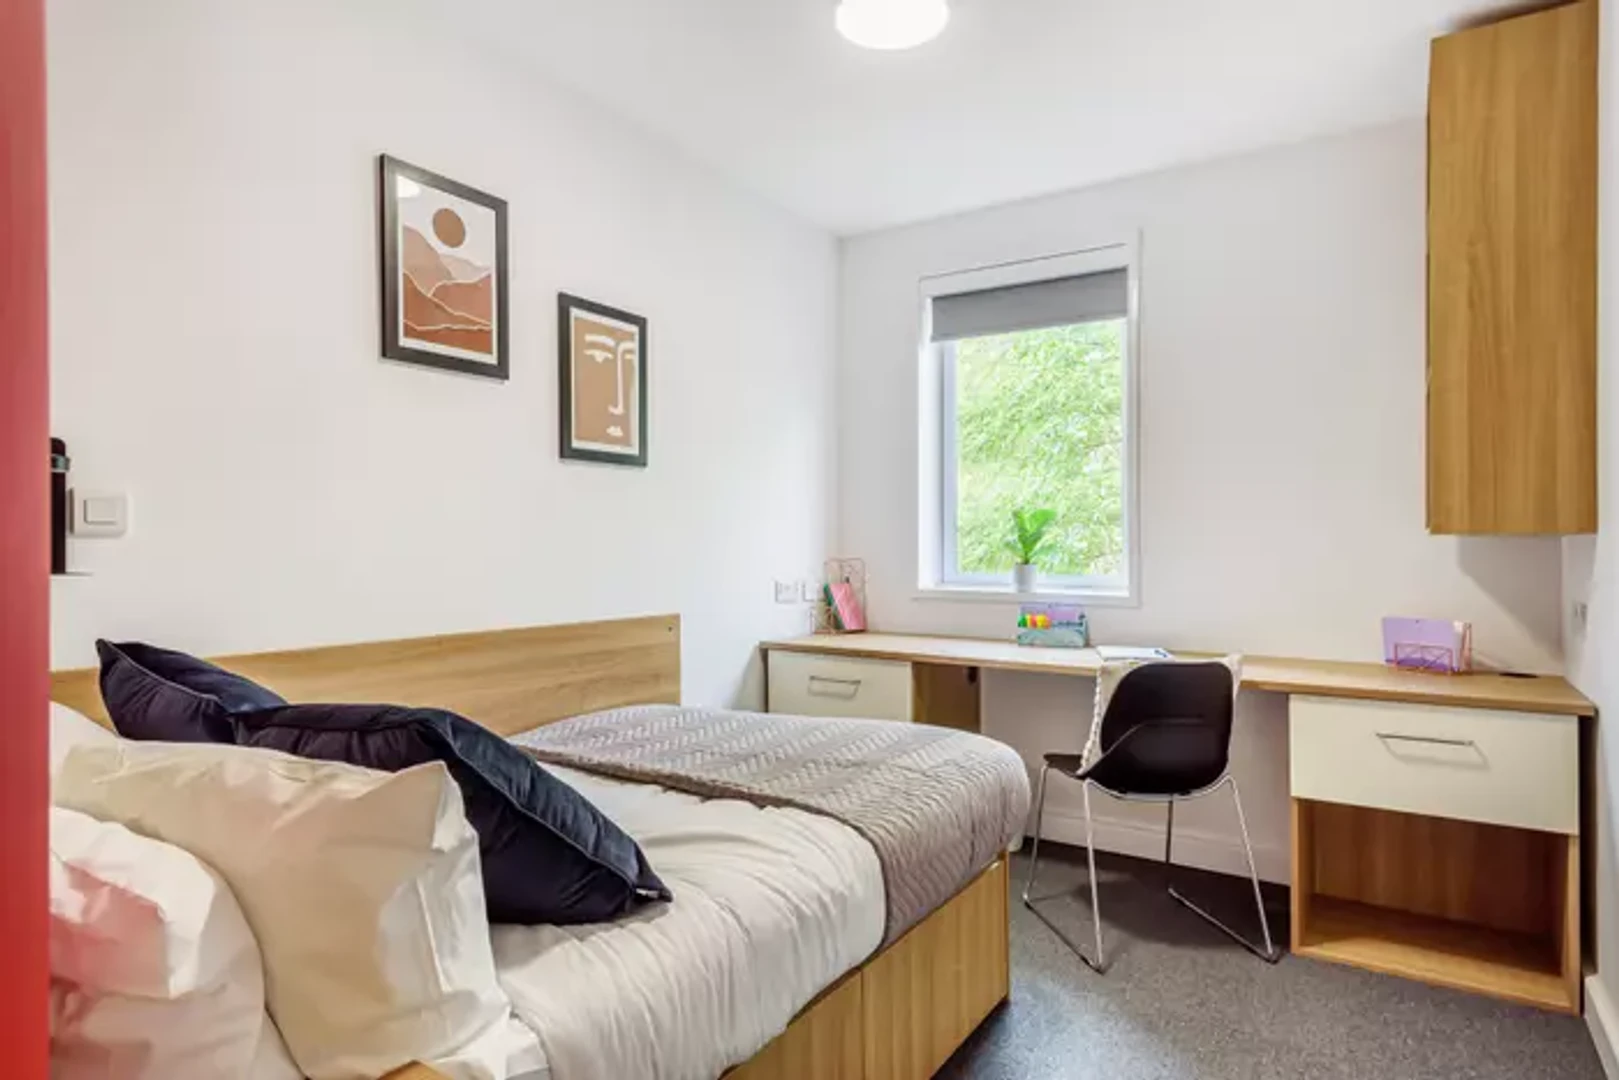 Renting rooms by the month in Oxford